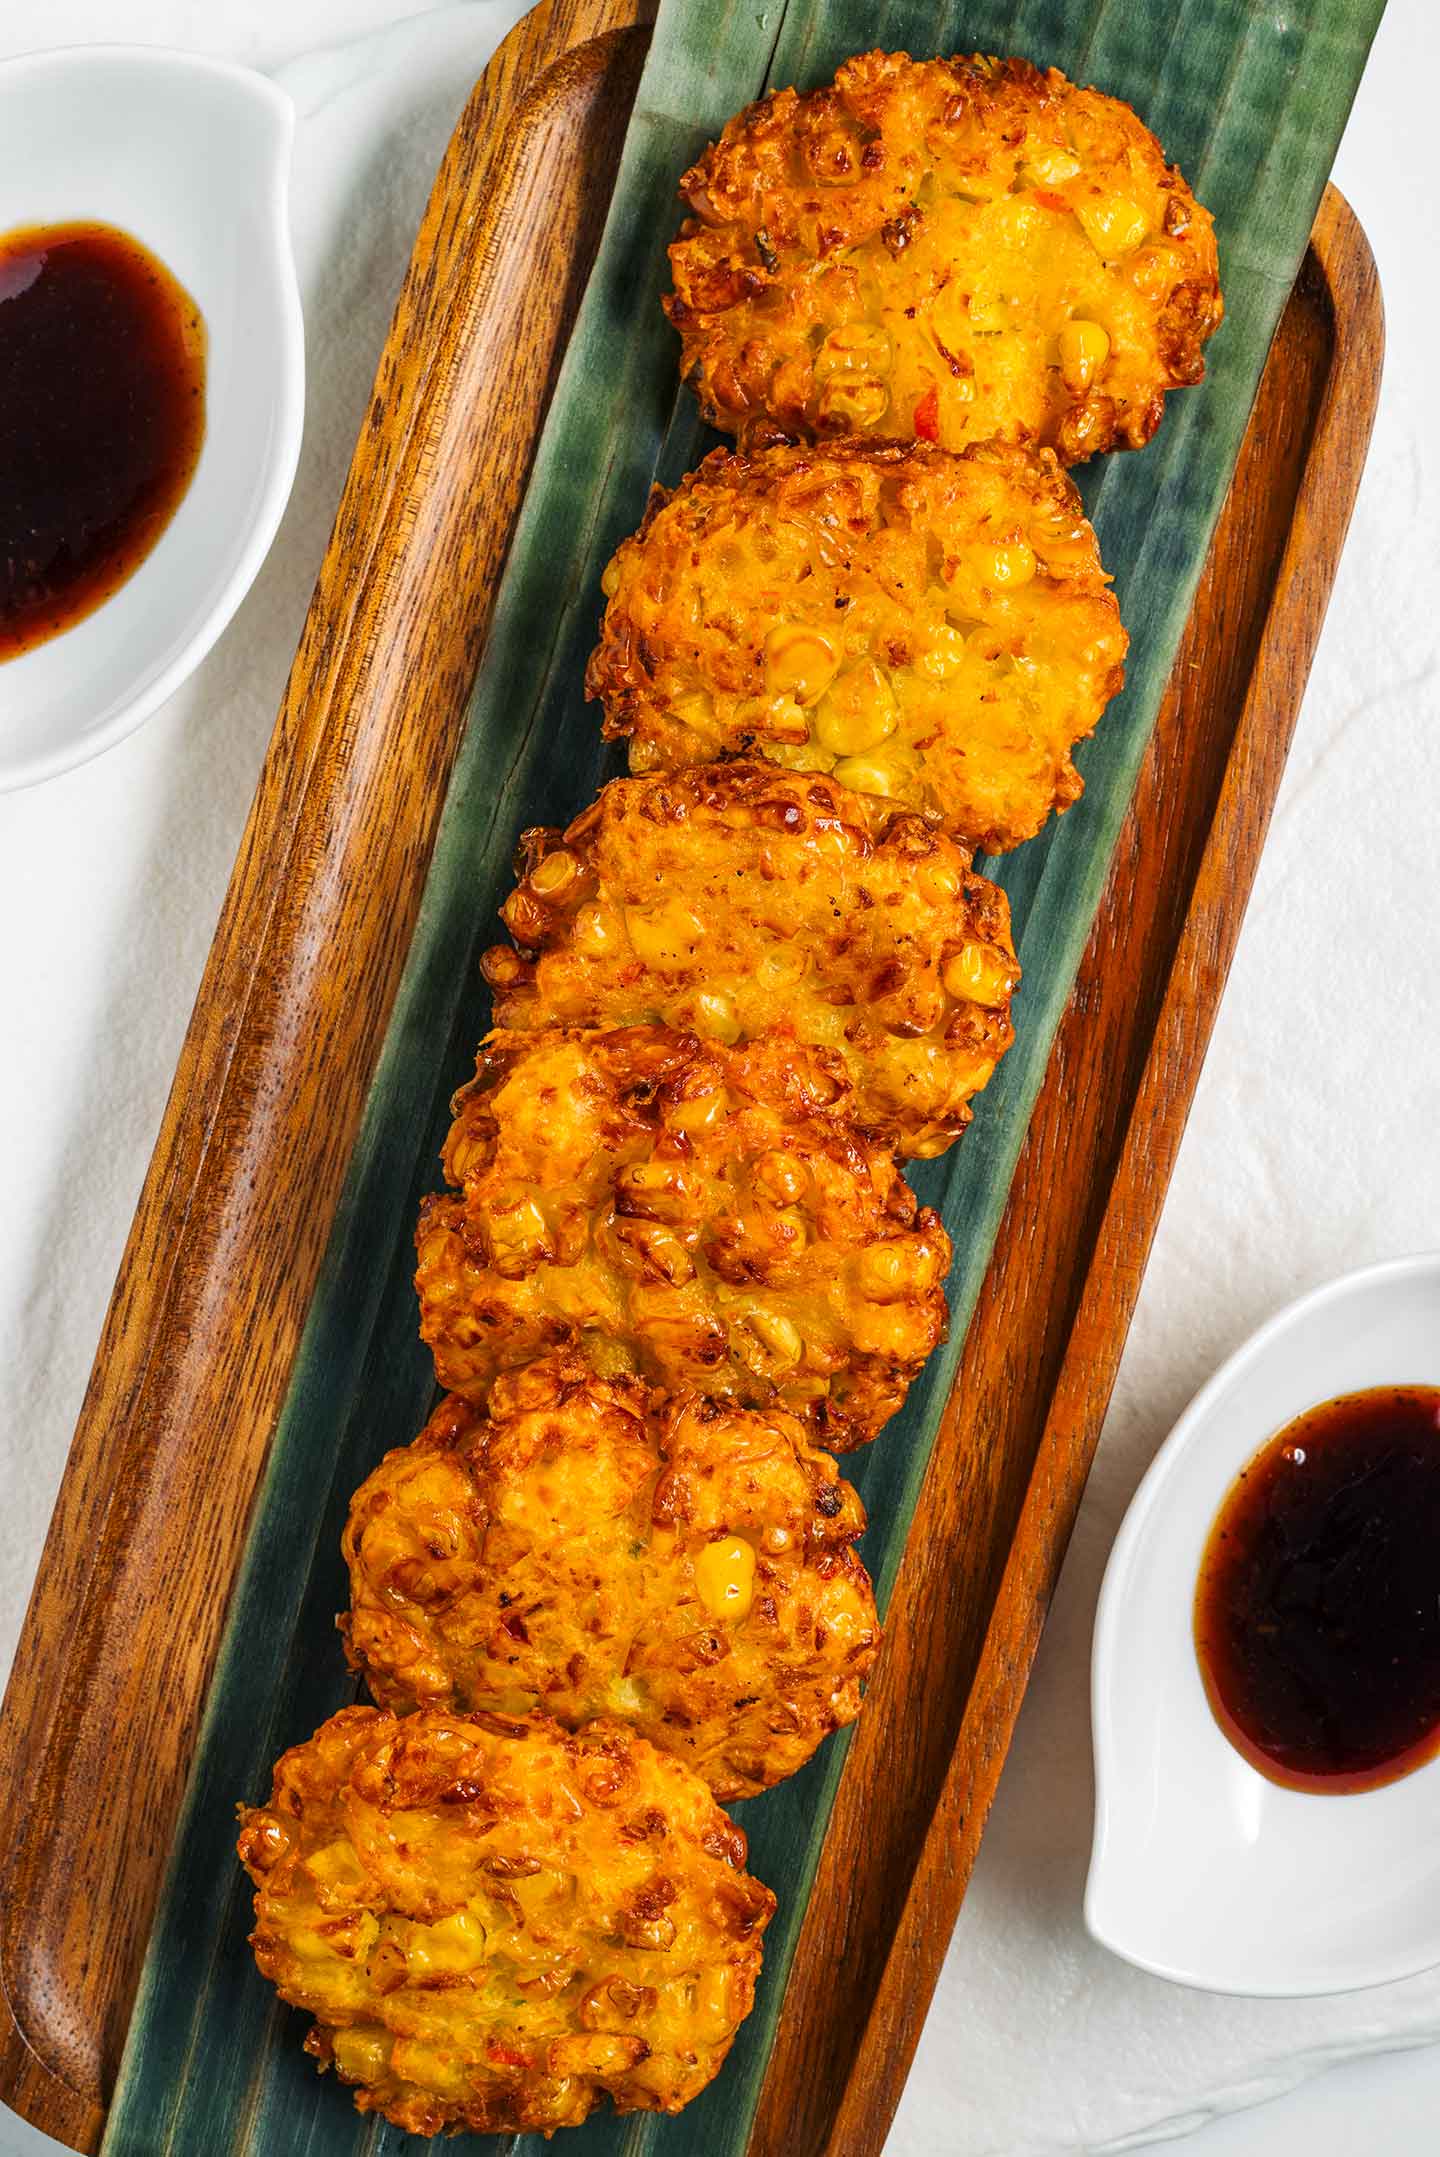 Top down view of vegan Indonesian corn fritters (perkedels) lined up on a tray. The fritters are round, golden, and pieces of caramelized sweet corn are visible. Dipping sauce rests beside the tray.